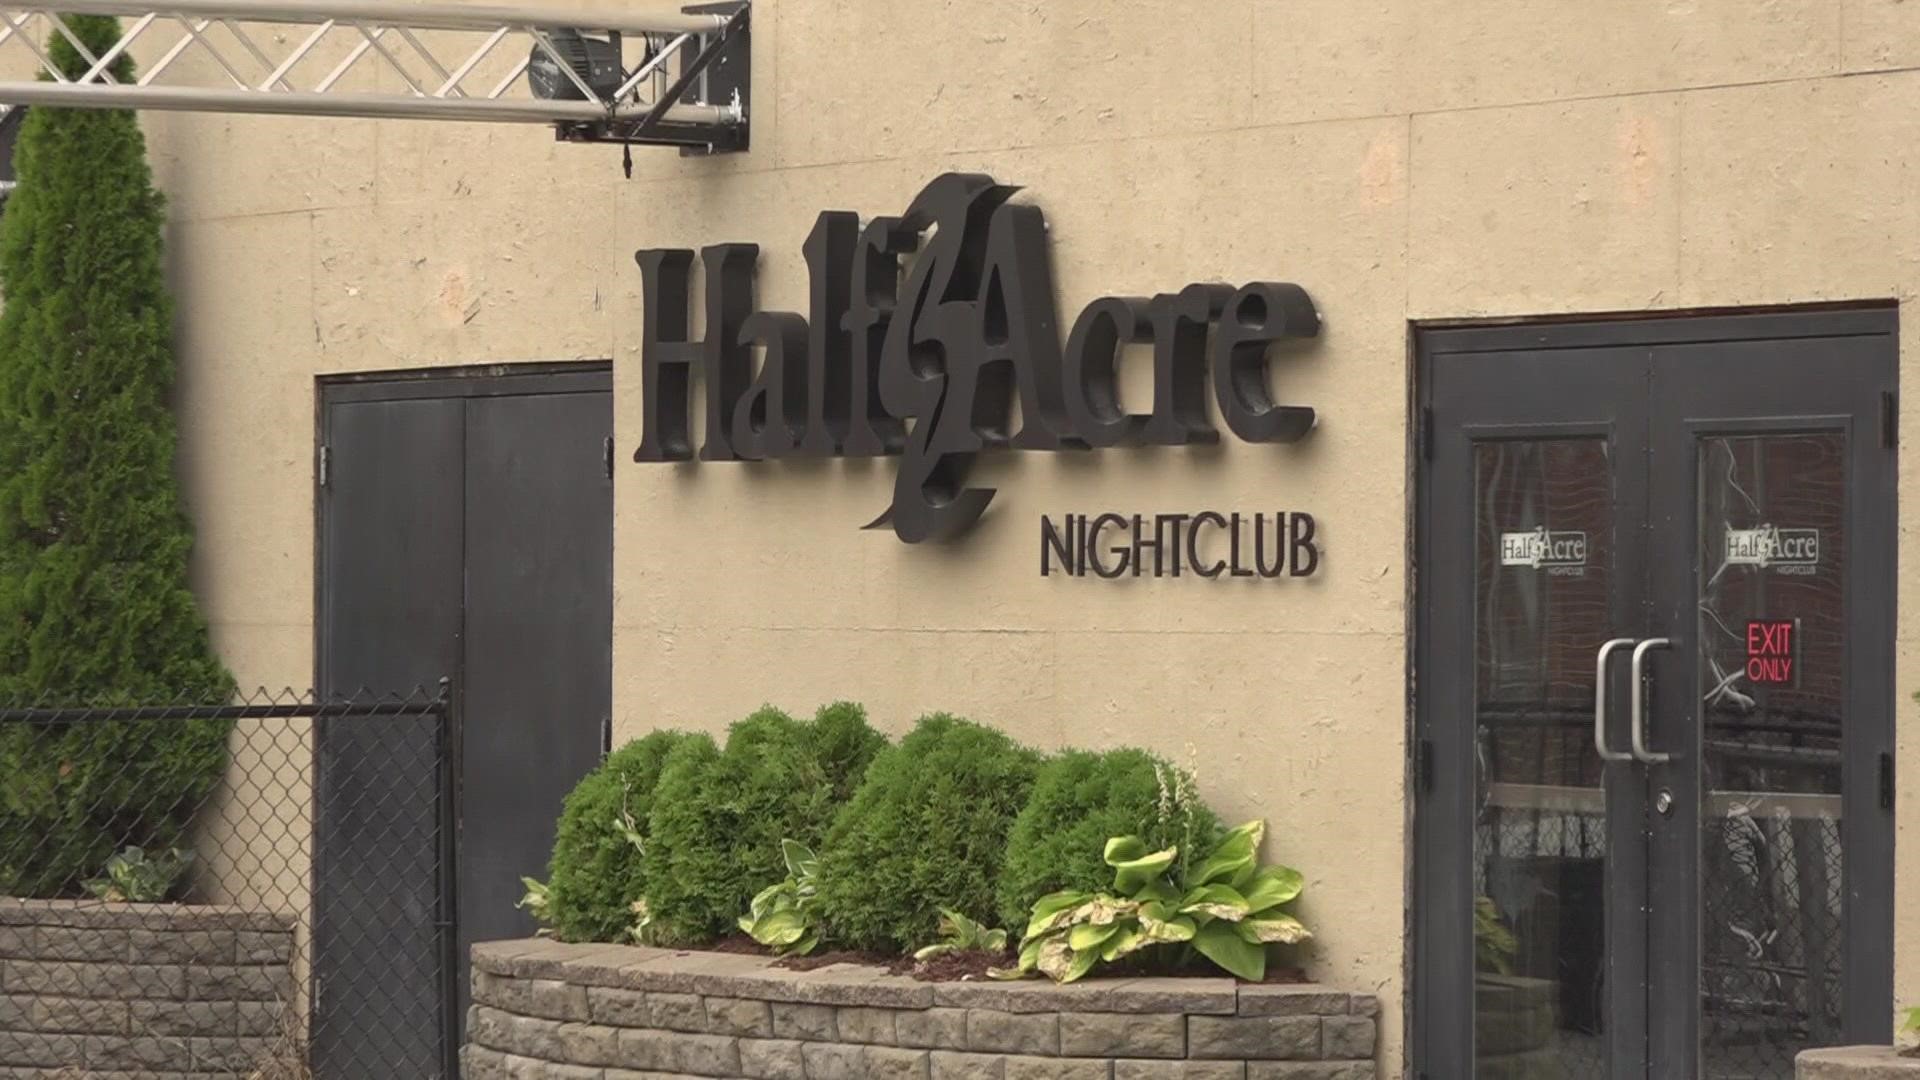 The meeting held Monday addressed recent disturbances and incidents at Half Acre Nightclub.